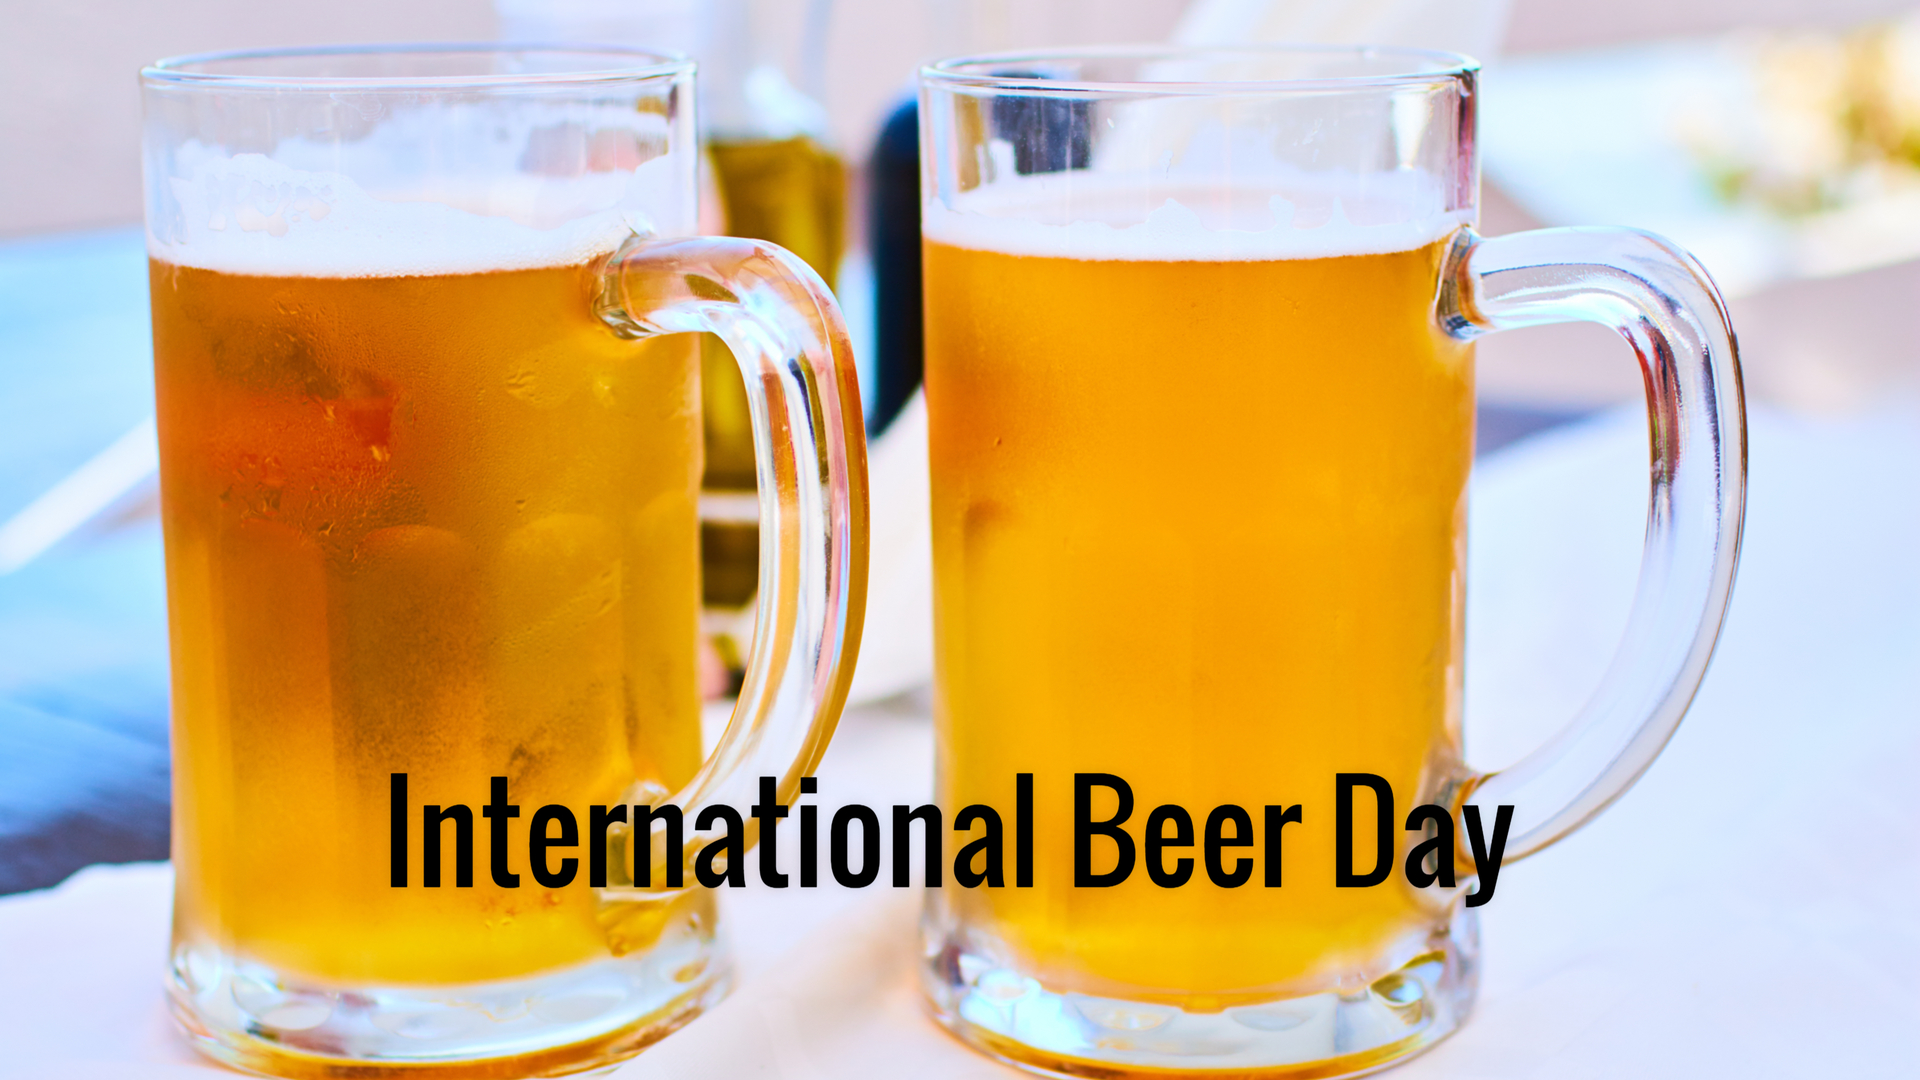 international beer day 2019 wishes